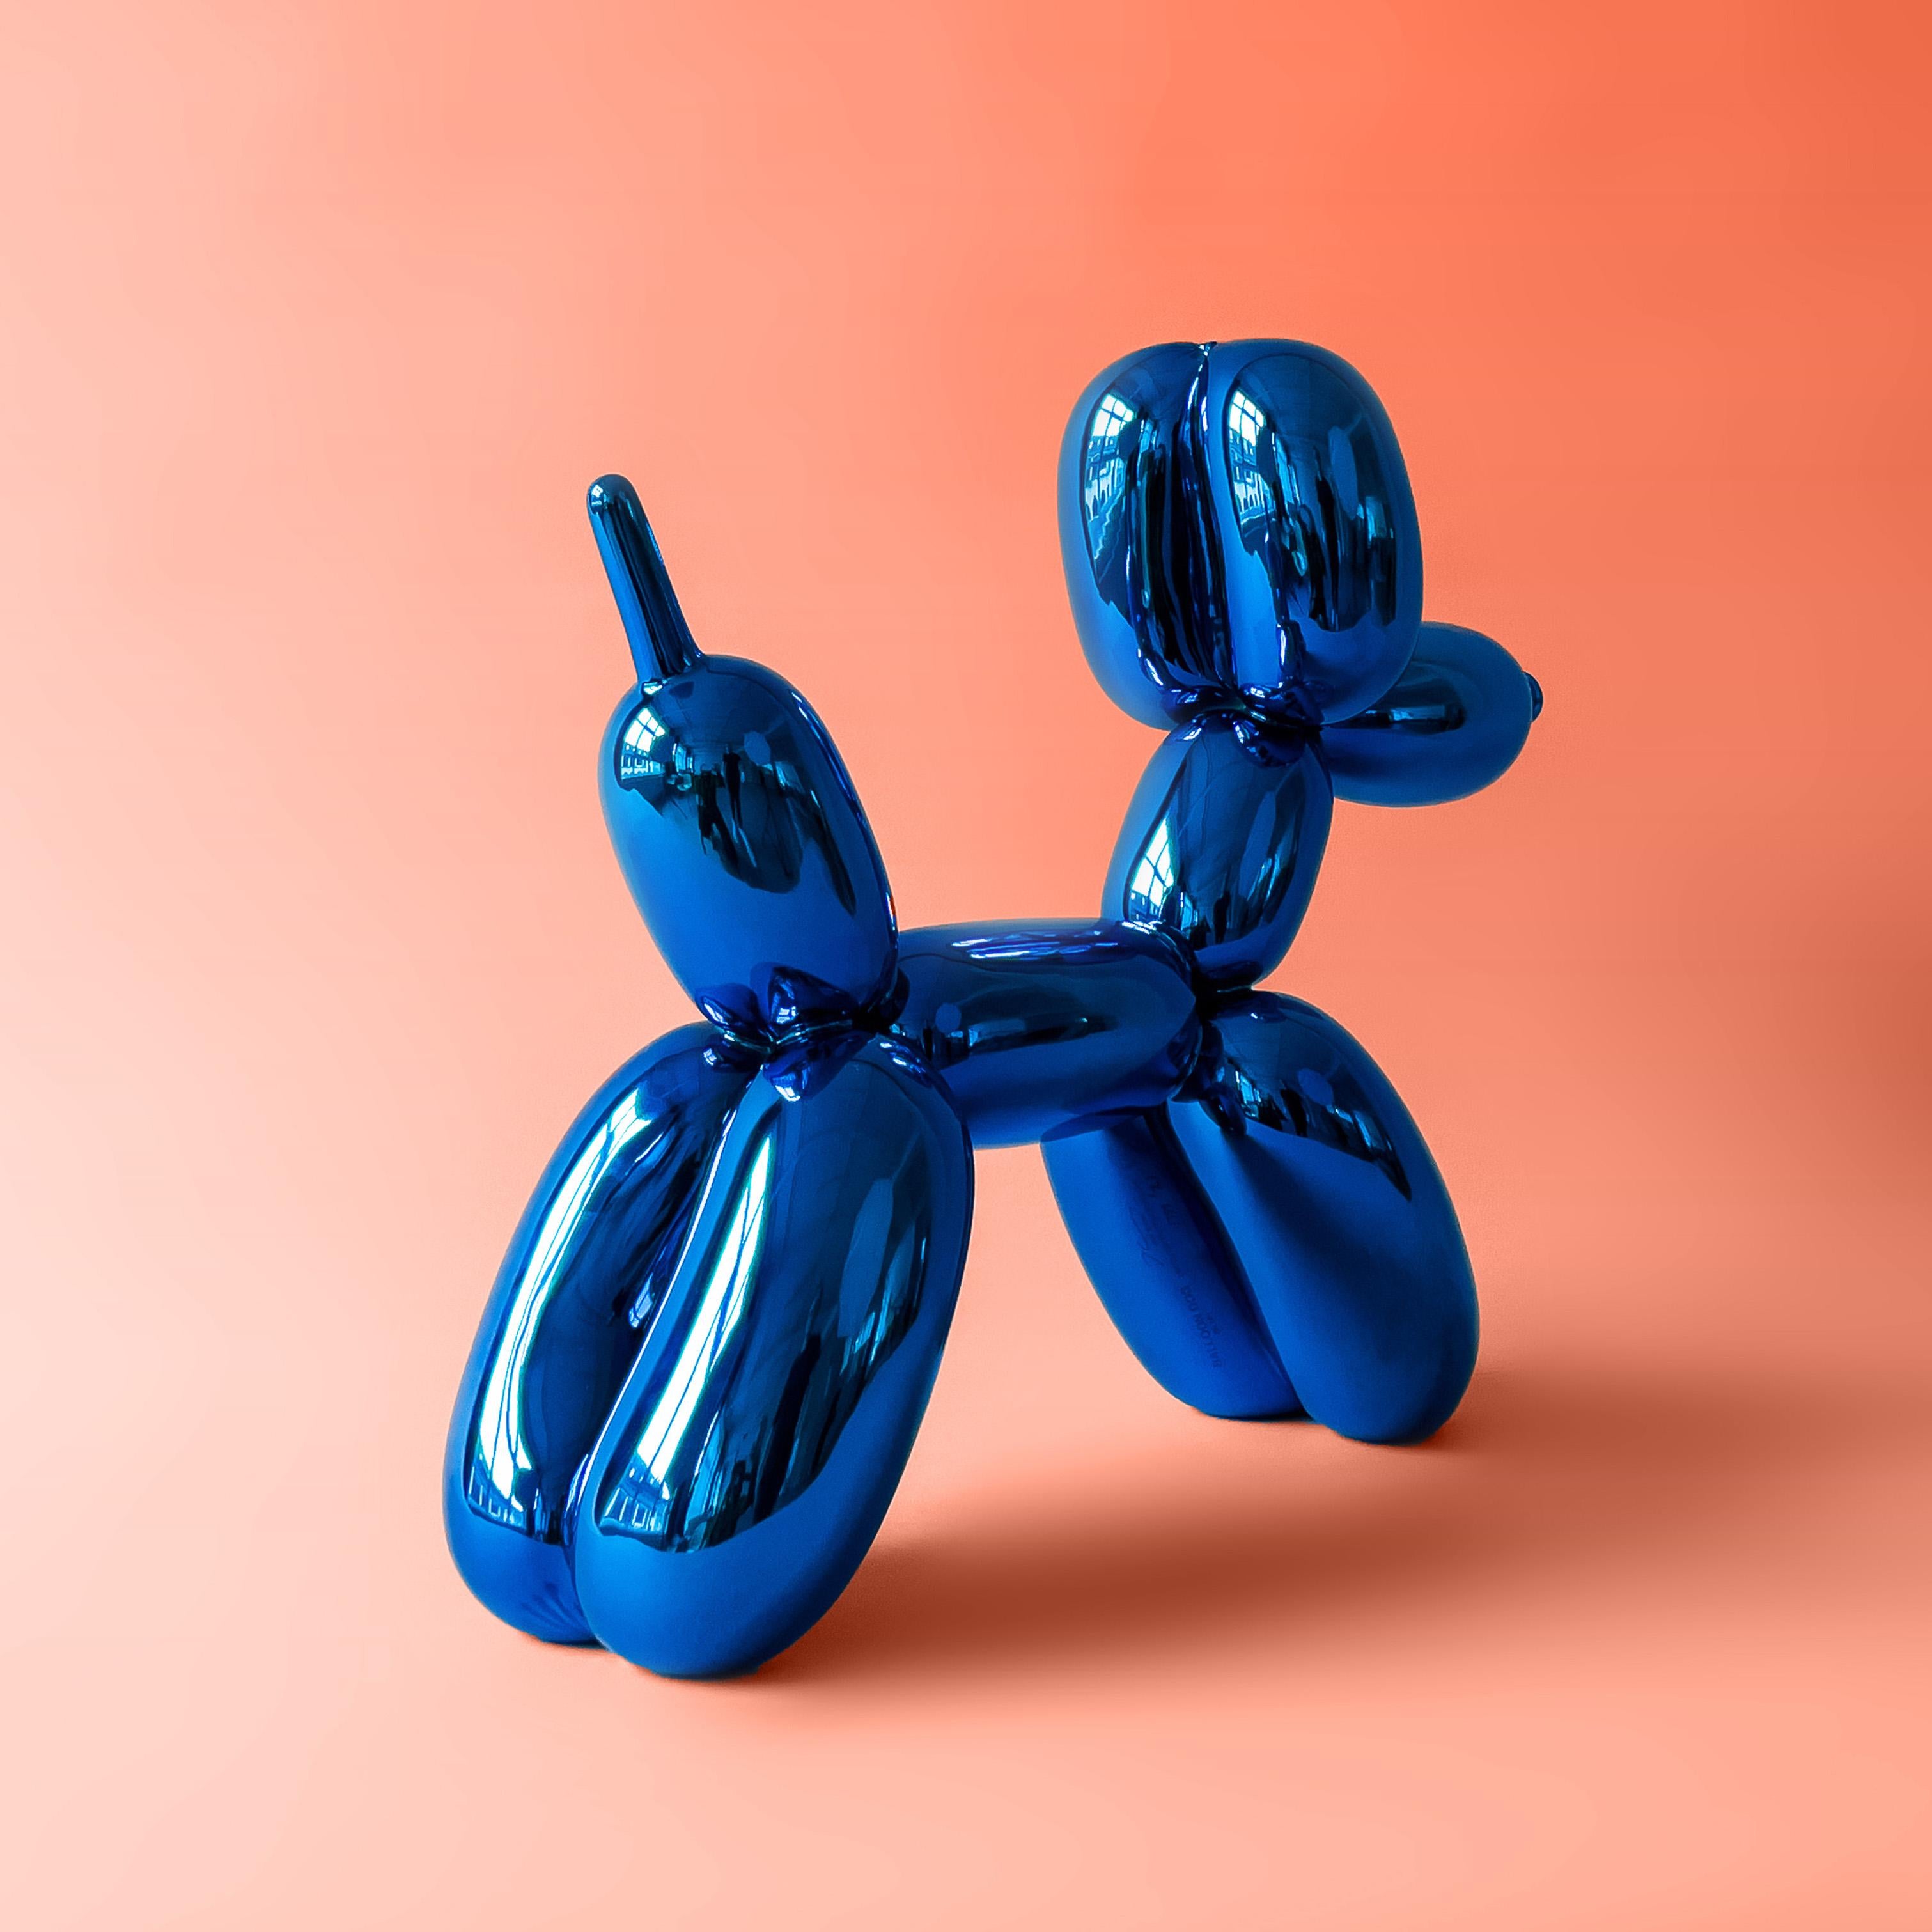 In Koons’ hands even the most familiar, everyday items transcend commonality to become true icons manifesting the essence of American popular culture.

Jeff Koons
Balloon Dog (Blue) - Jeff Koons, 21st Century, Contemporary, Porcelain, Sculpture,